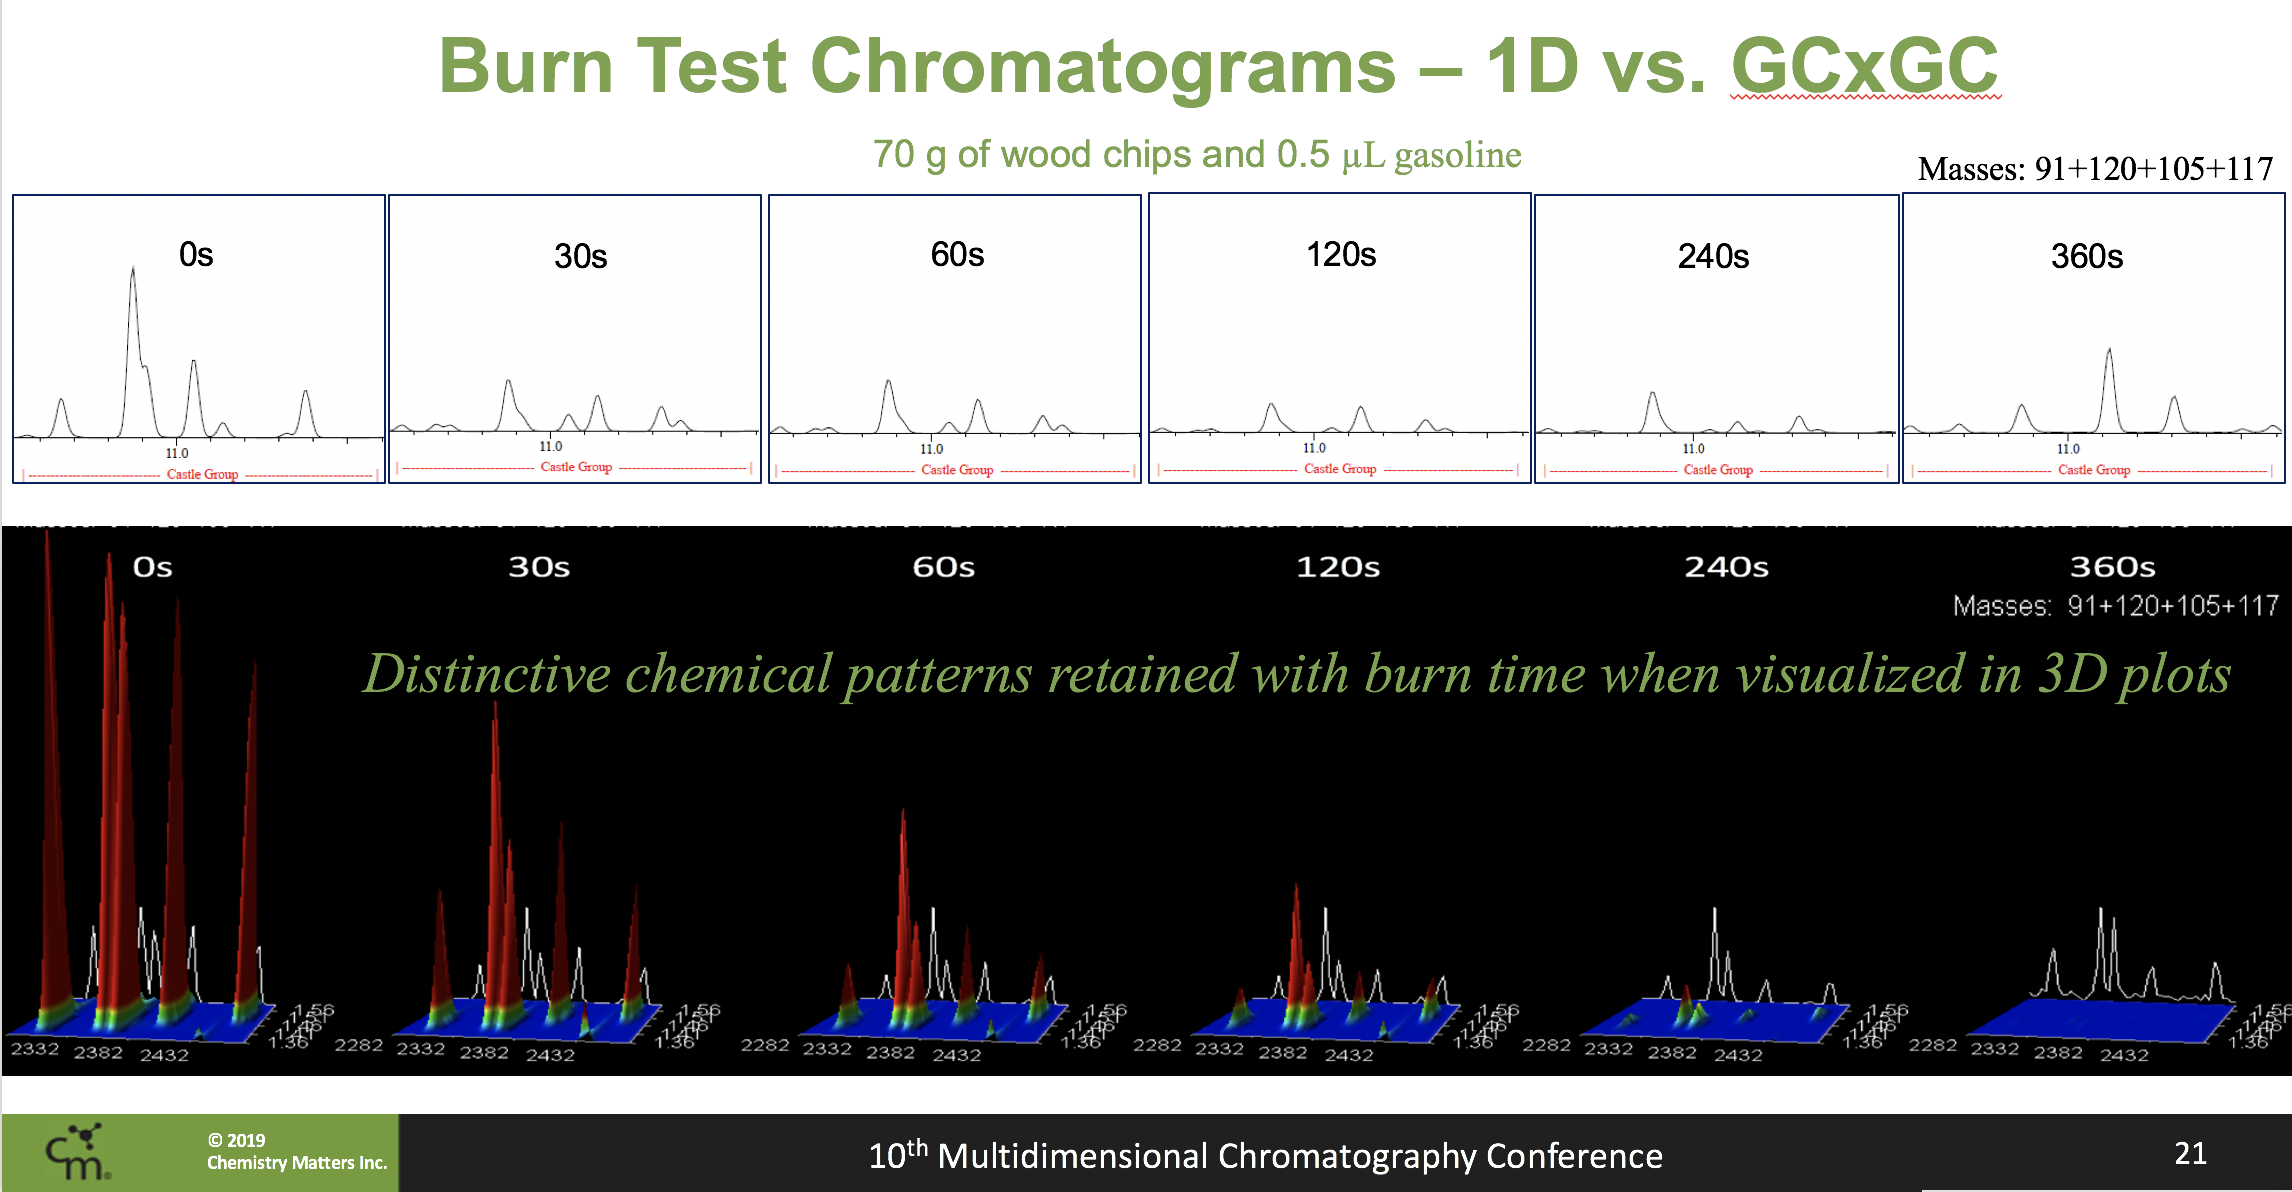 GCxGC chromatograms of castle group at lower and lower concentrations